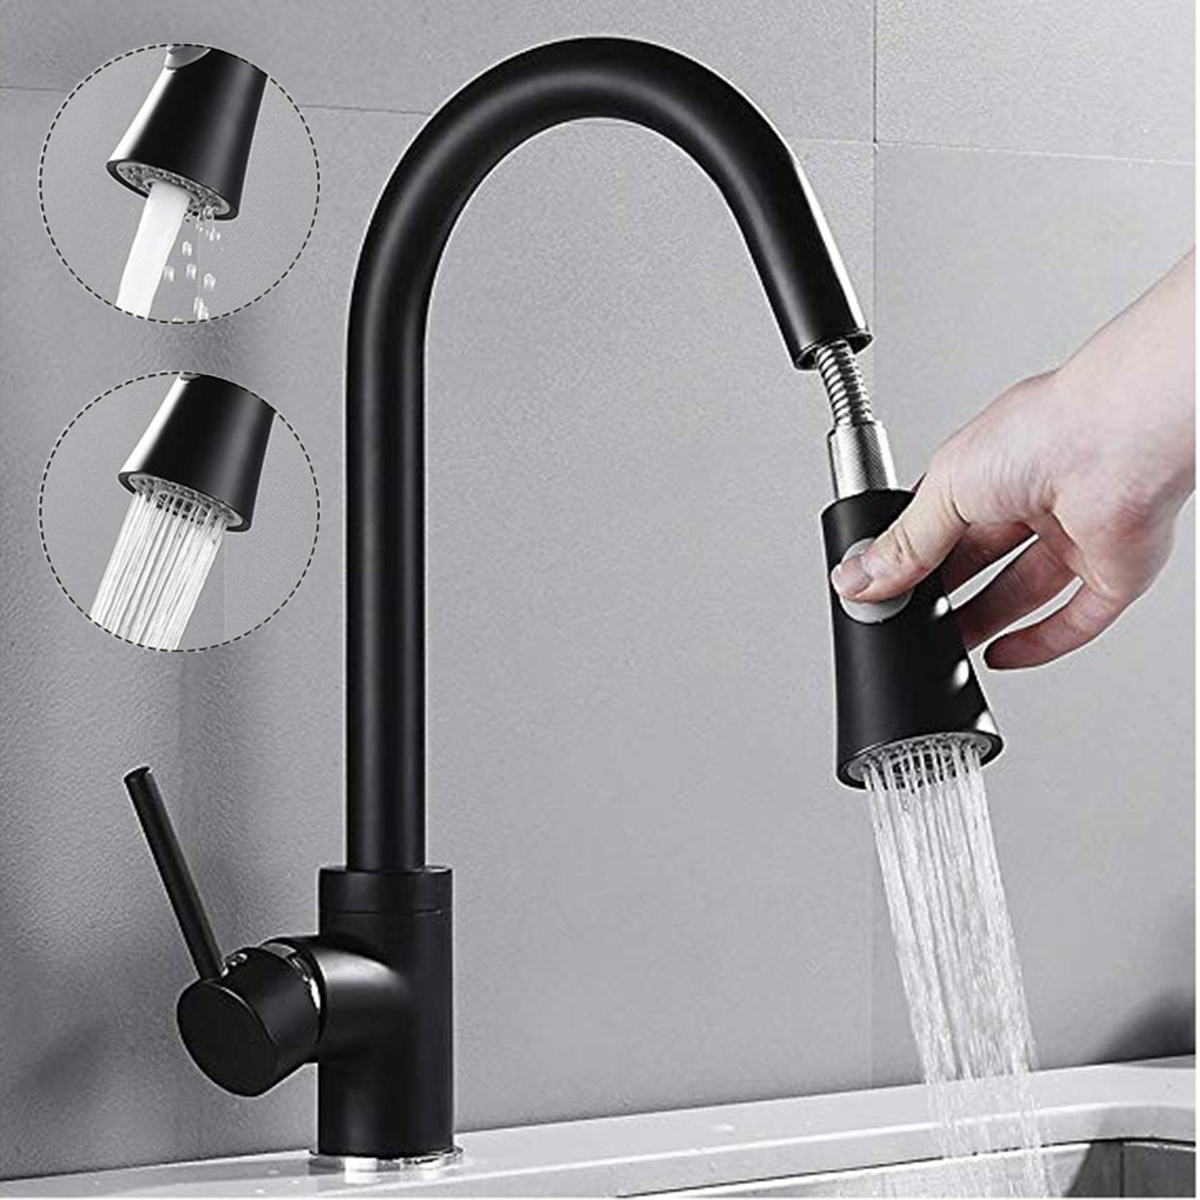 

360° Kitchen Basin Sink Swivel Pull Out Faucet Sprayer Hot Cold Water Mixer Tap